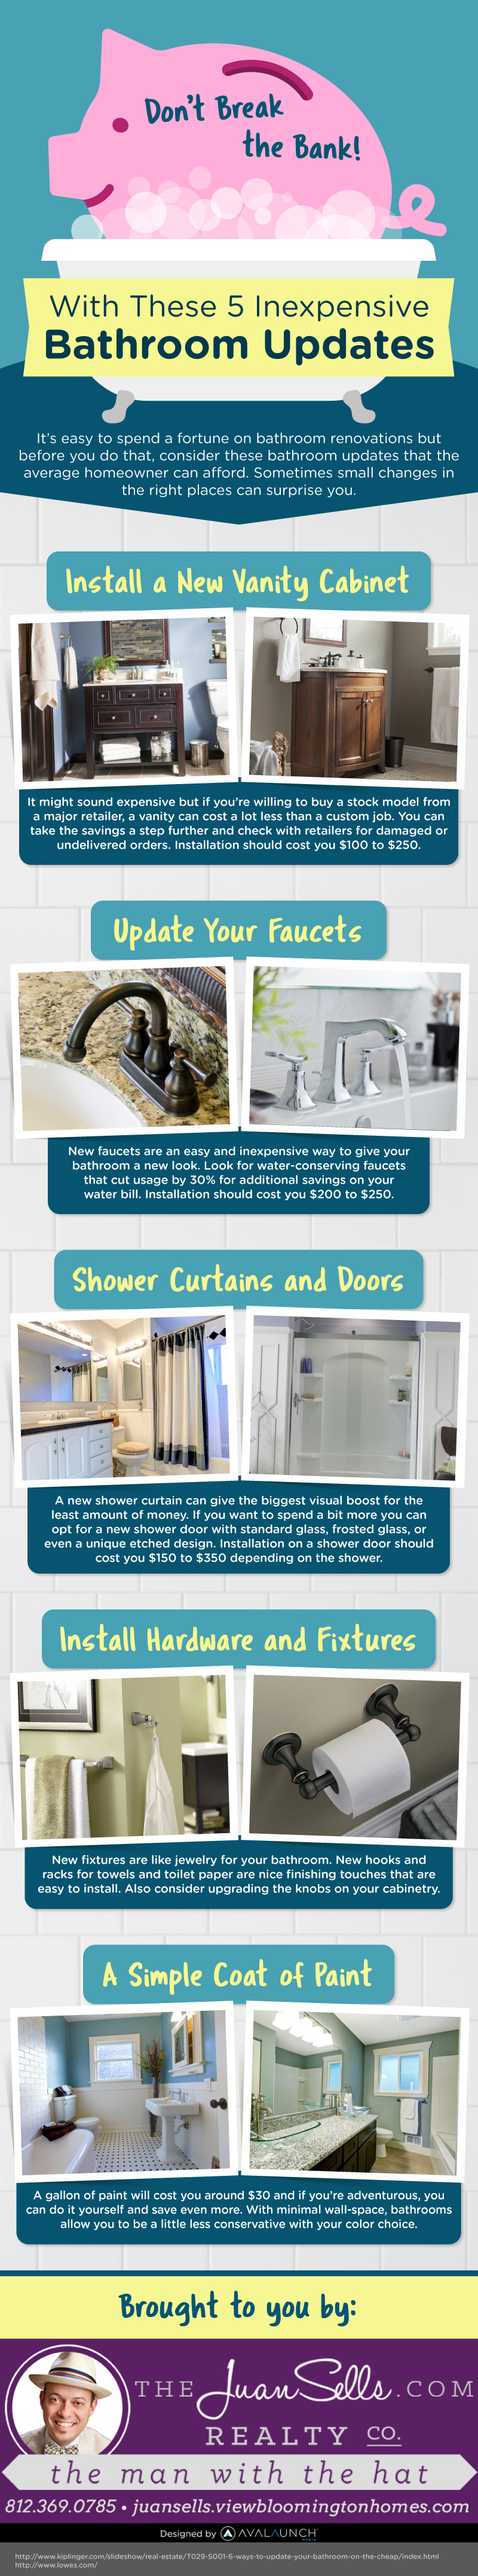 Describes inexpensive bathroom updates including installing a new vanity, updating your faucets, buying a new shower curtain, installing new fixtures, and repainting.